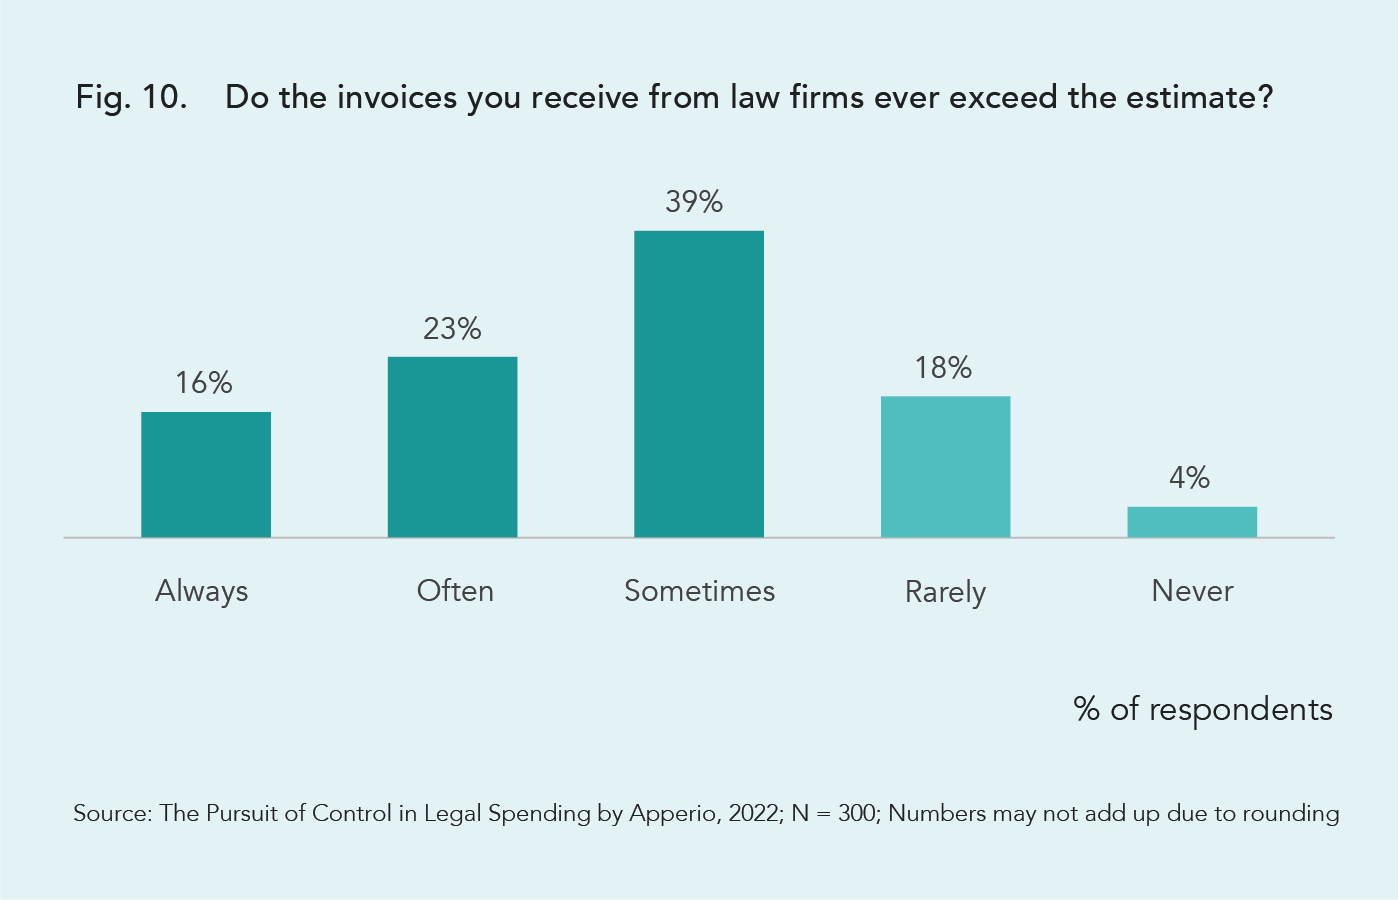 More than three-quarters (78%) of private equity and venture capital firms say they receive surprise law firm invoices at least some of the time. 